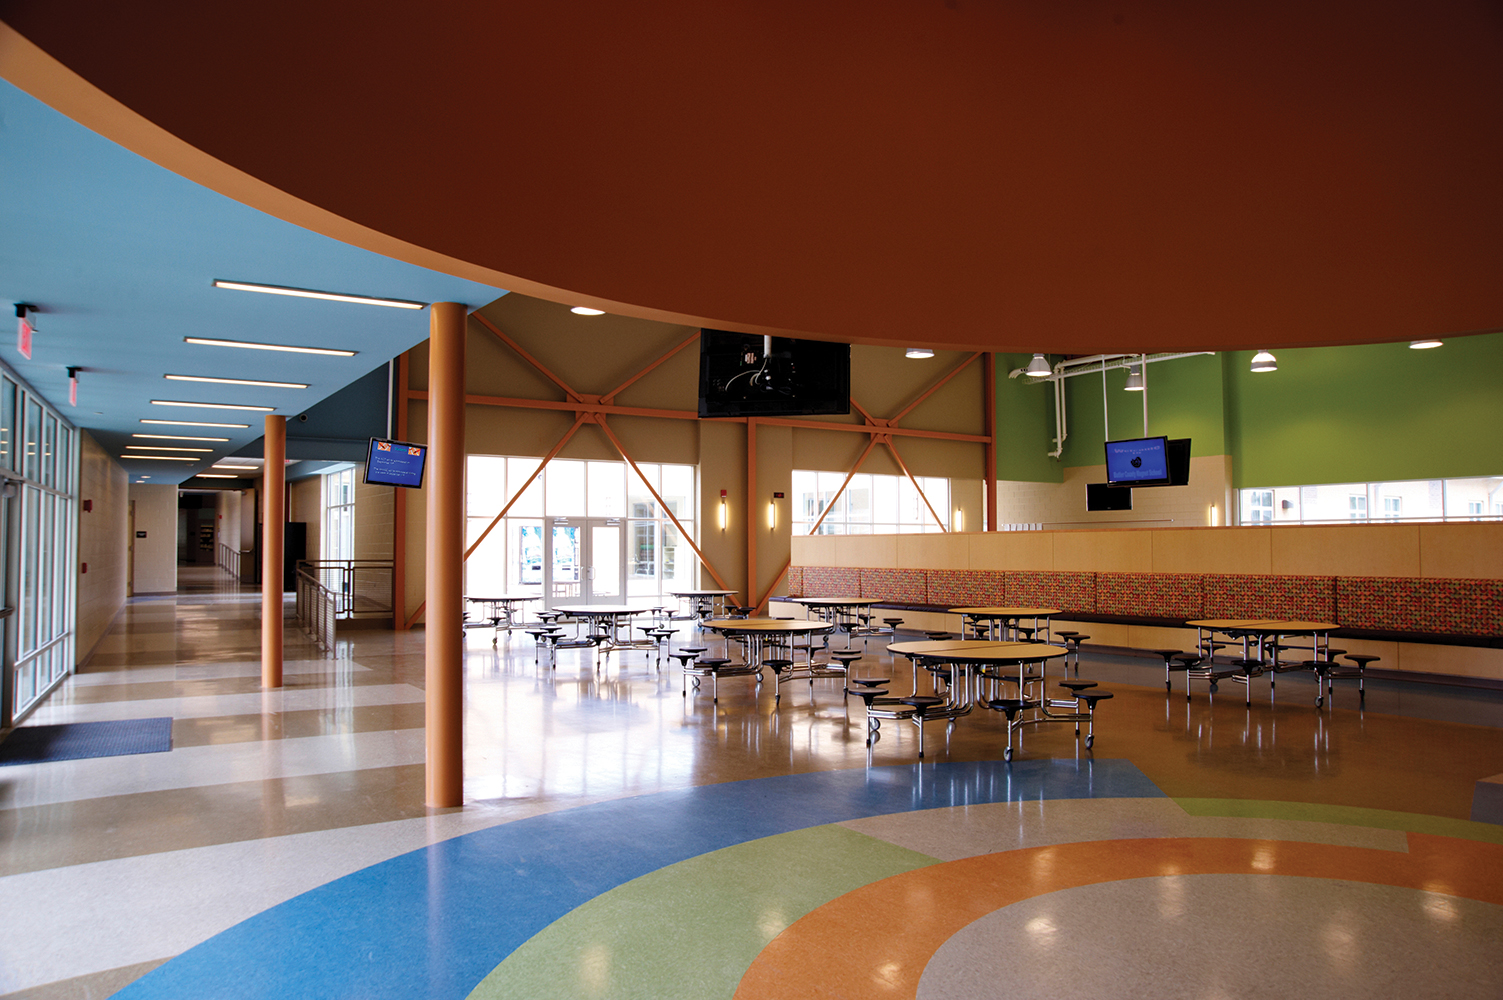 Visage is good supplementary classroom lighting, shown here in ceiling mount configuration above a school cafeteria.